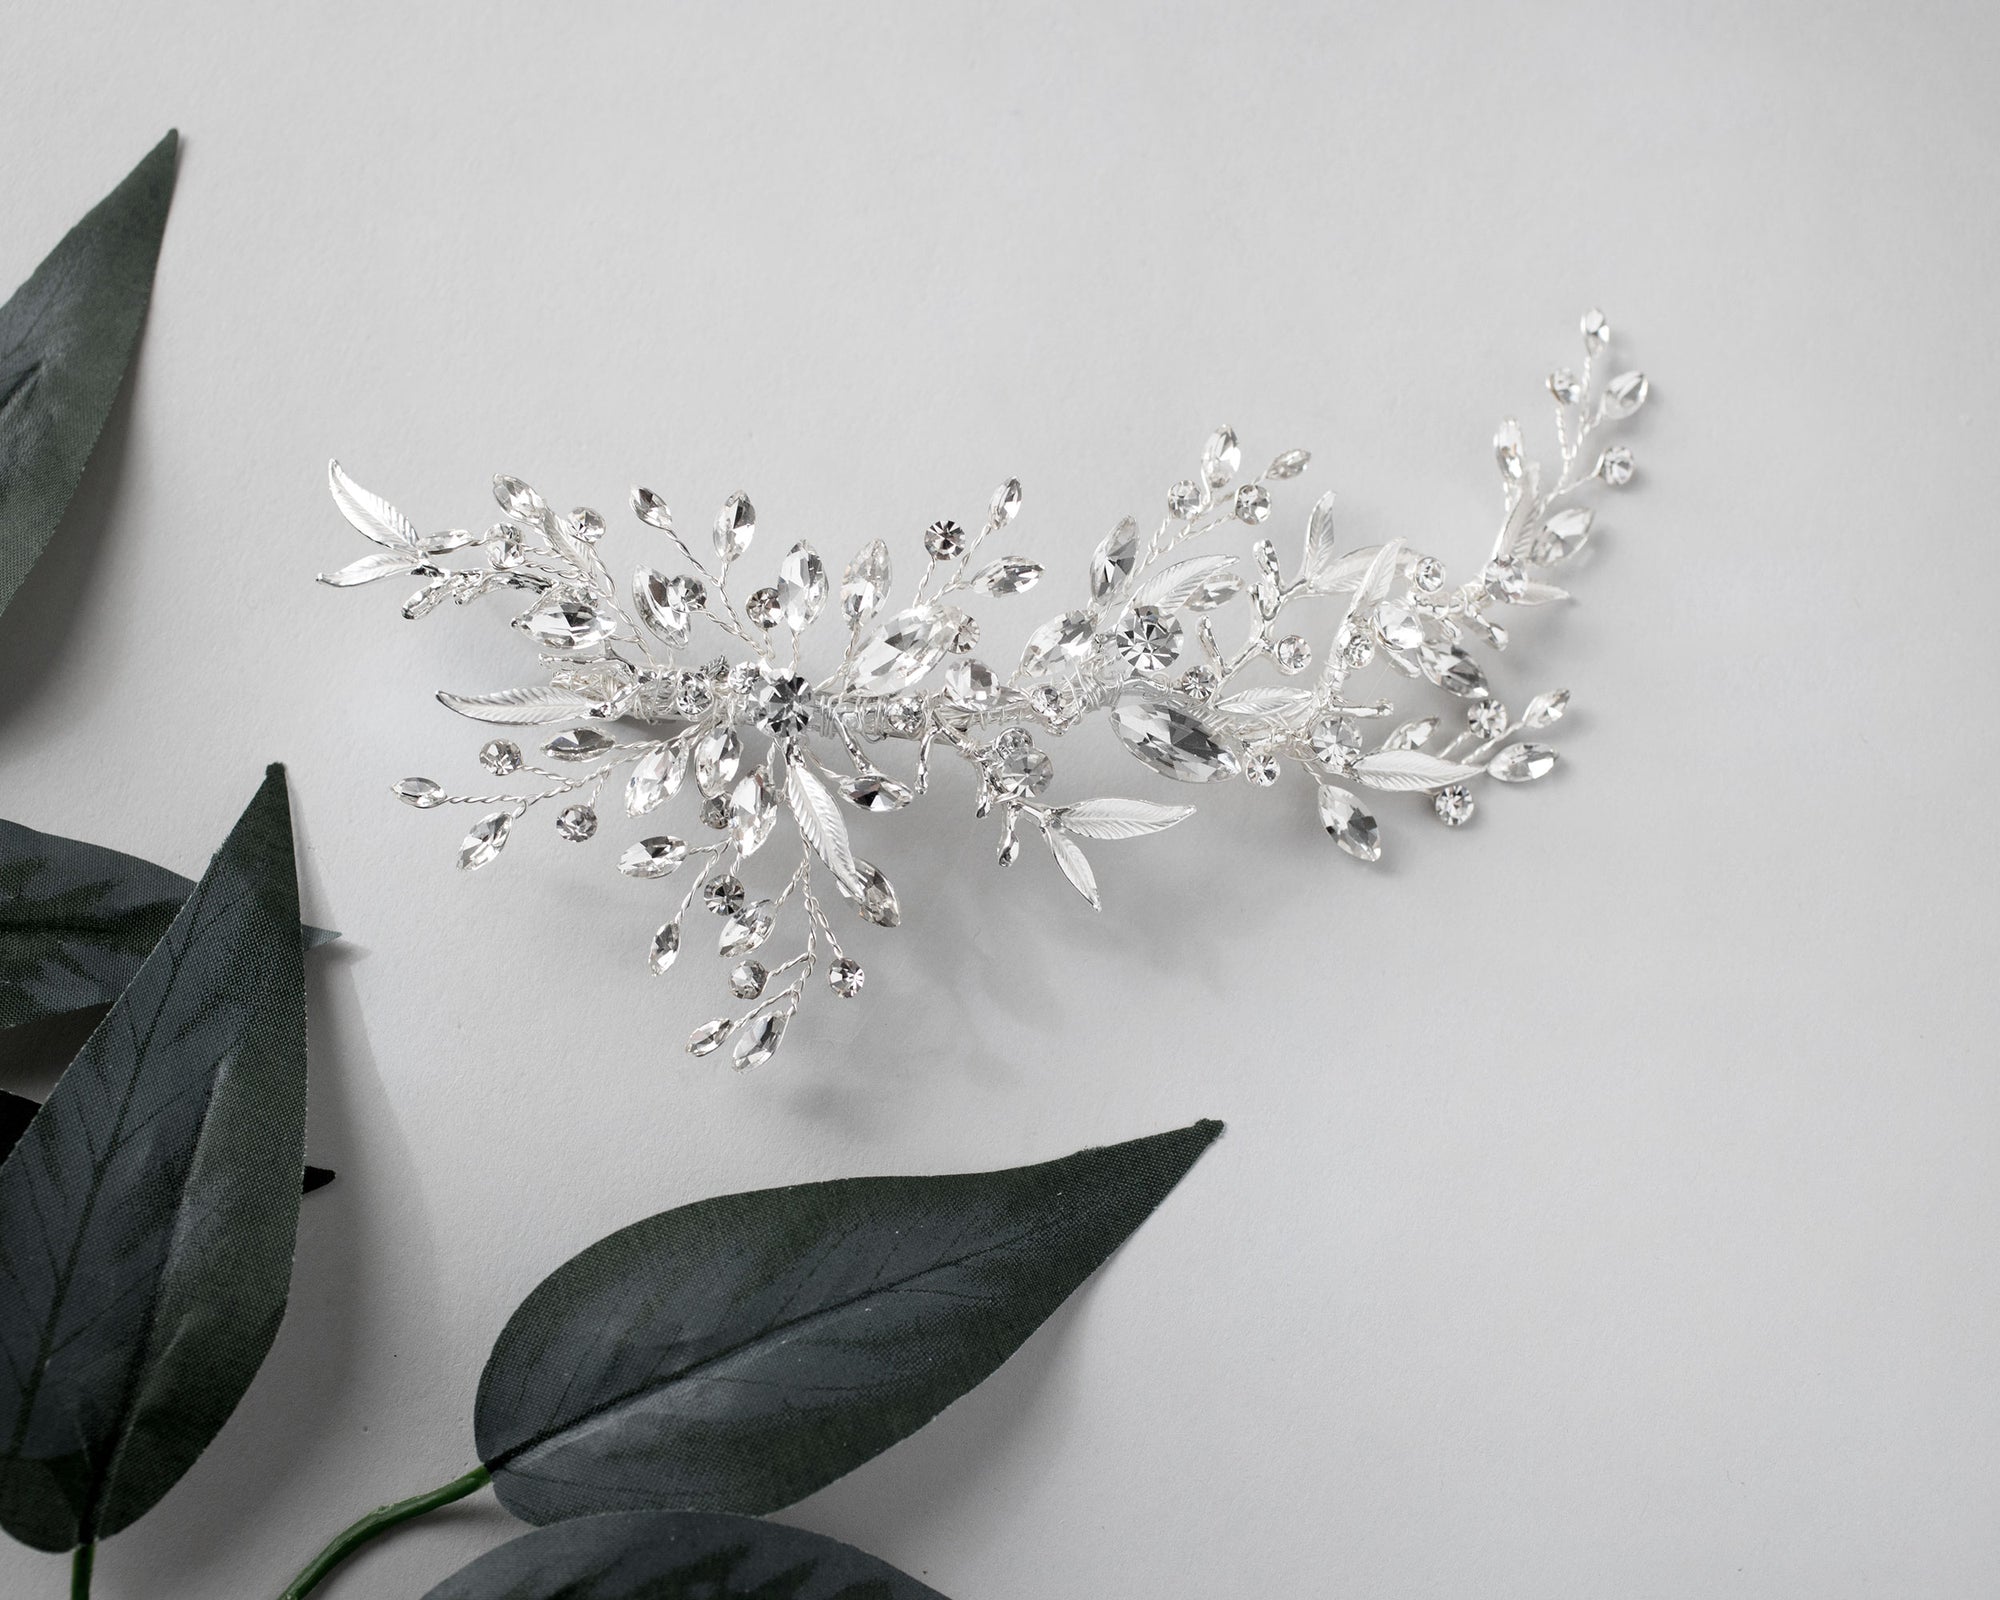 Bridal Hair Clip of Silver Narrow Leaves and Crystals- Cassandra Lynne